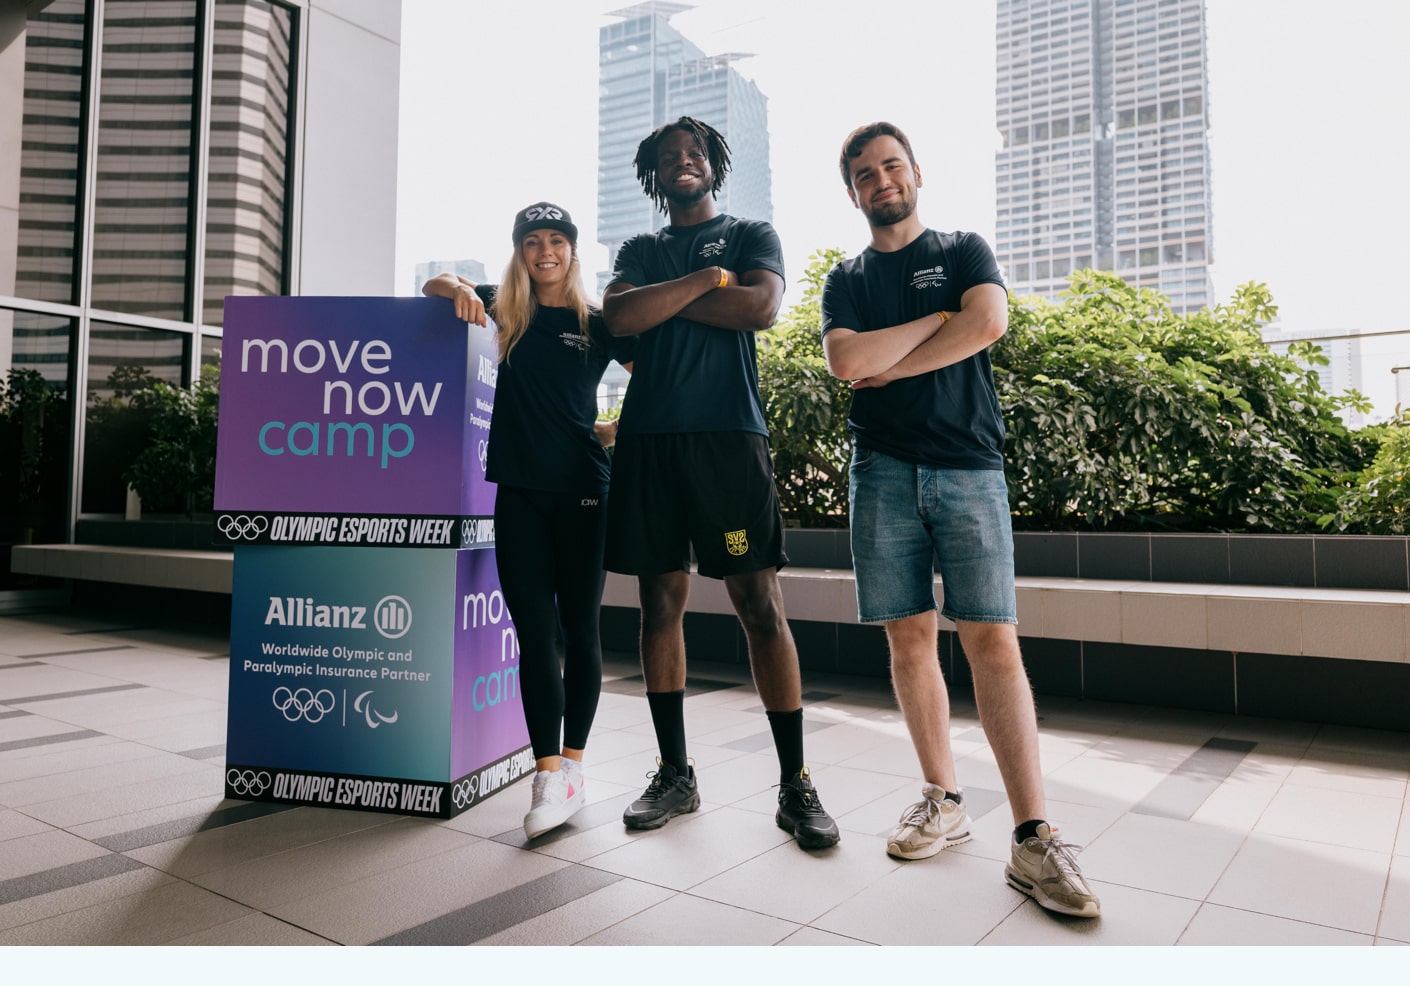 The coaches  of the MoveNow camp Mikaela Åhlin-Kottulinsky, Kassio and Sv2 standing next to each other in Singapore.